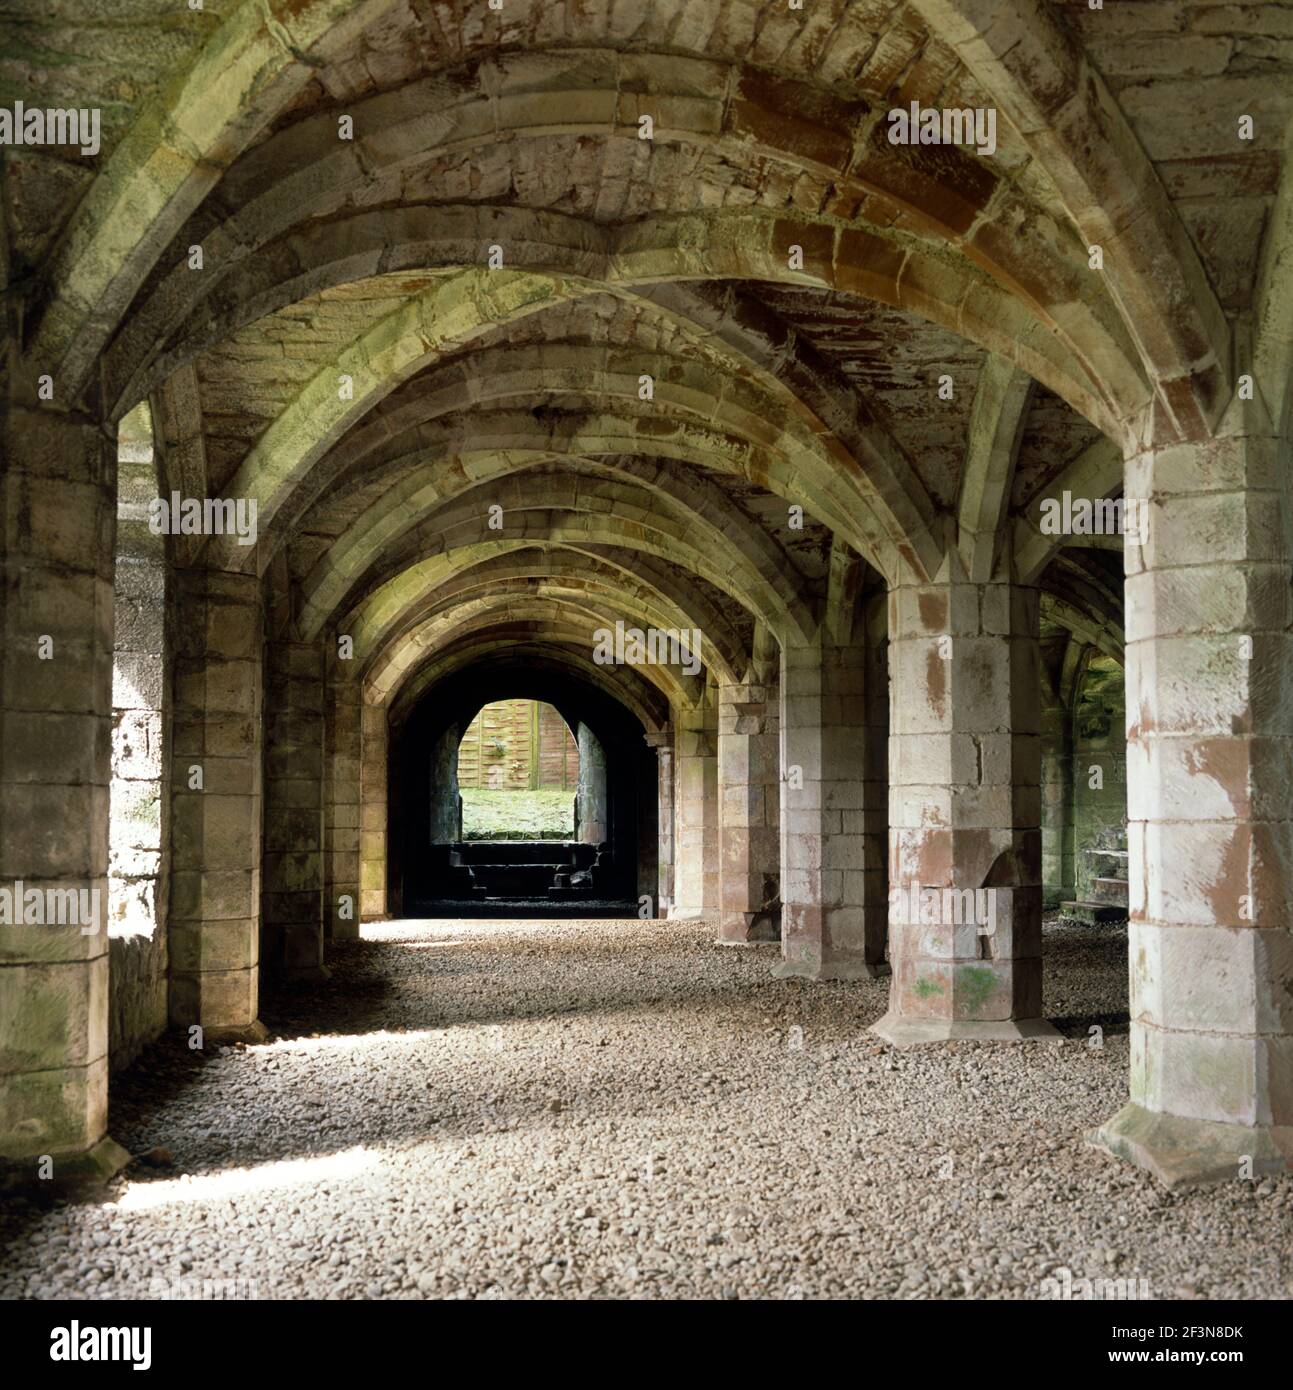 Lanercost priory undercroft, the buildings of a religious institution or monastic order. Arched vaulted roofs and columns of the cellars. Stock Photo